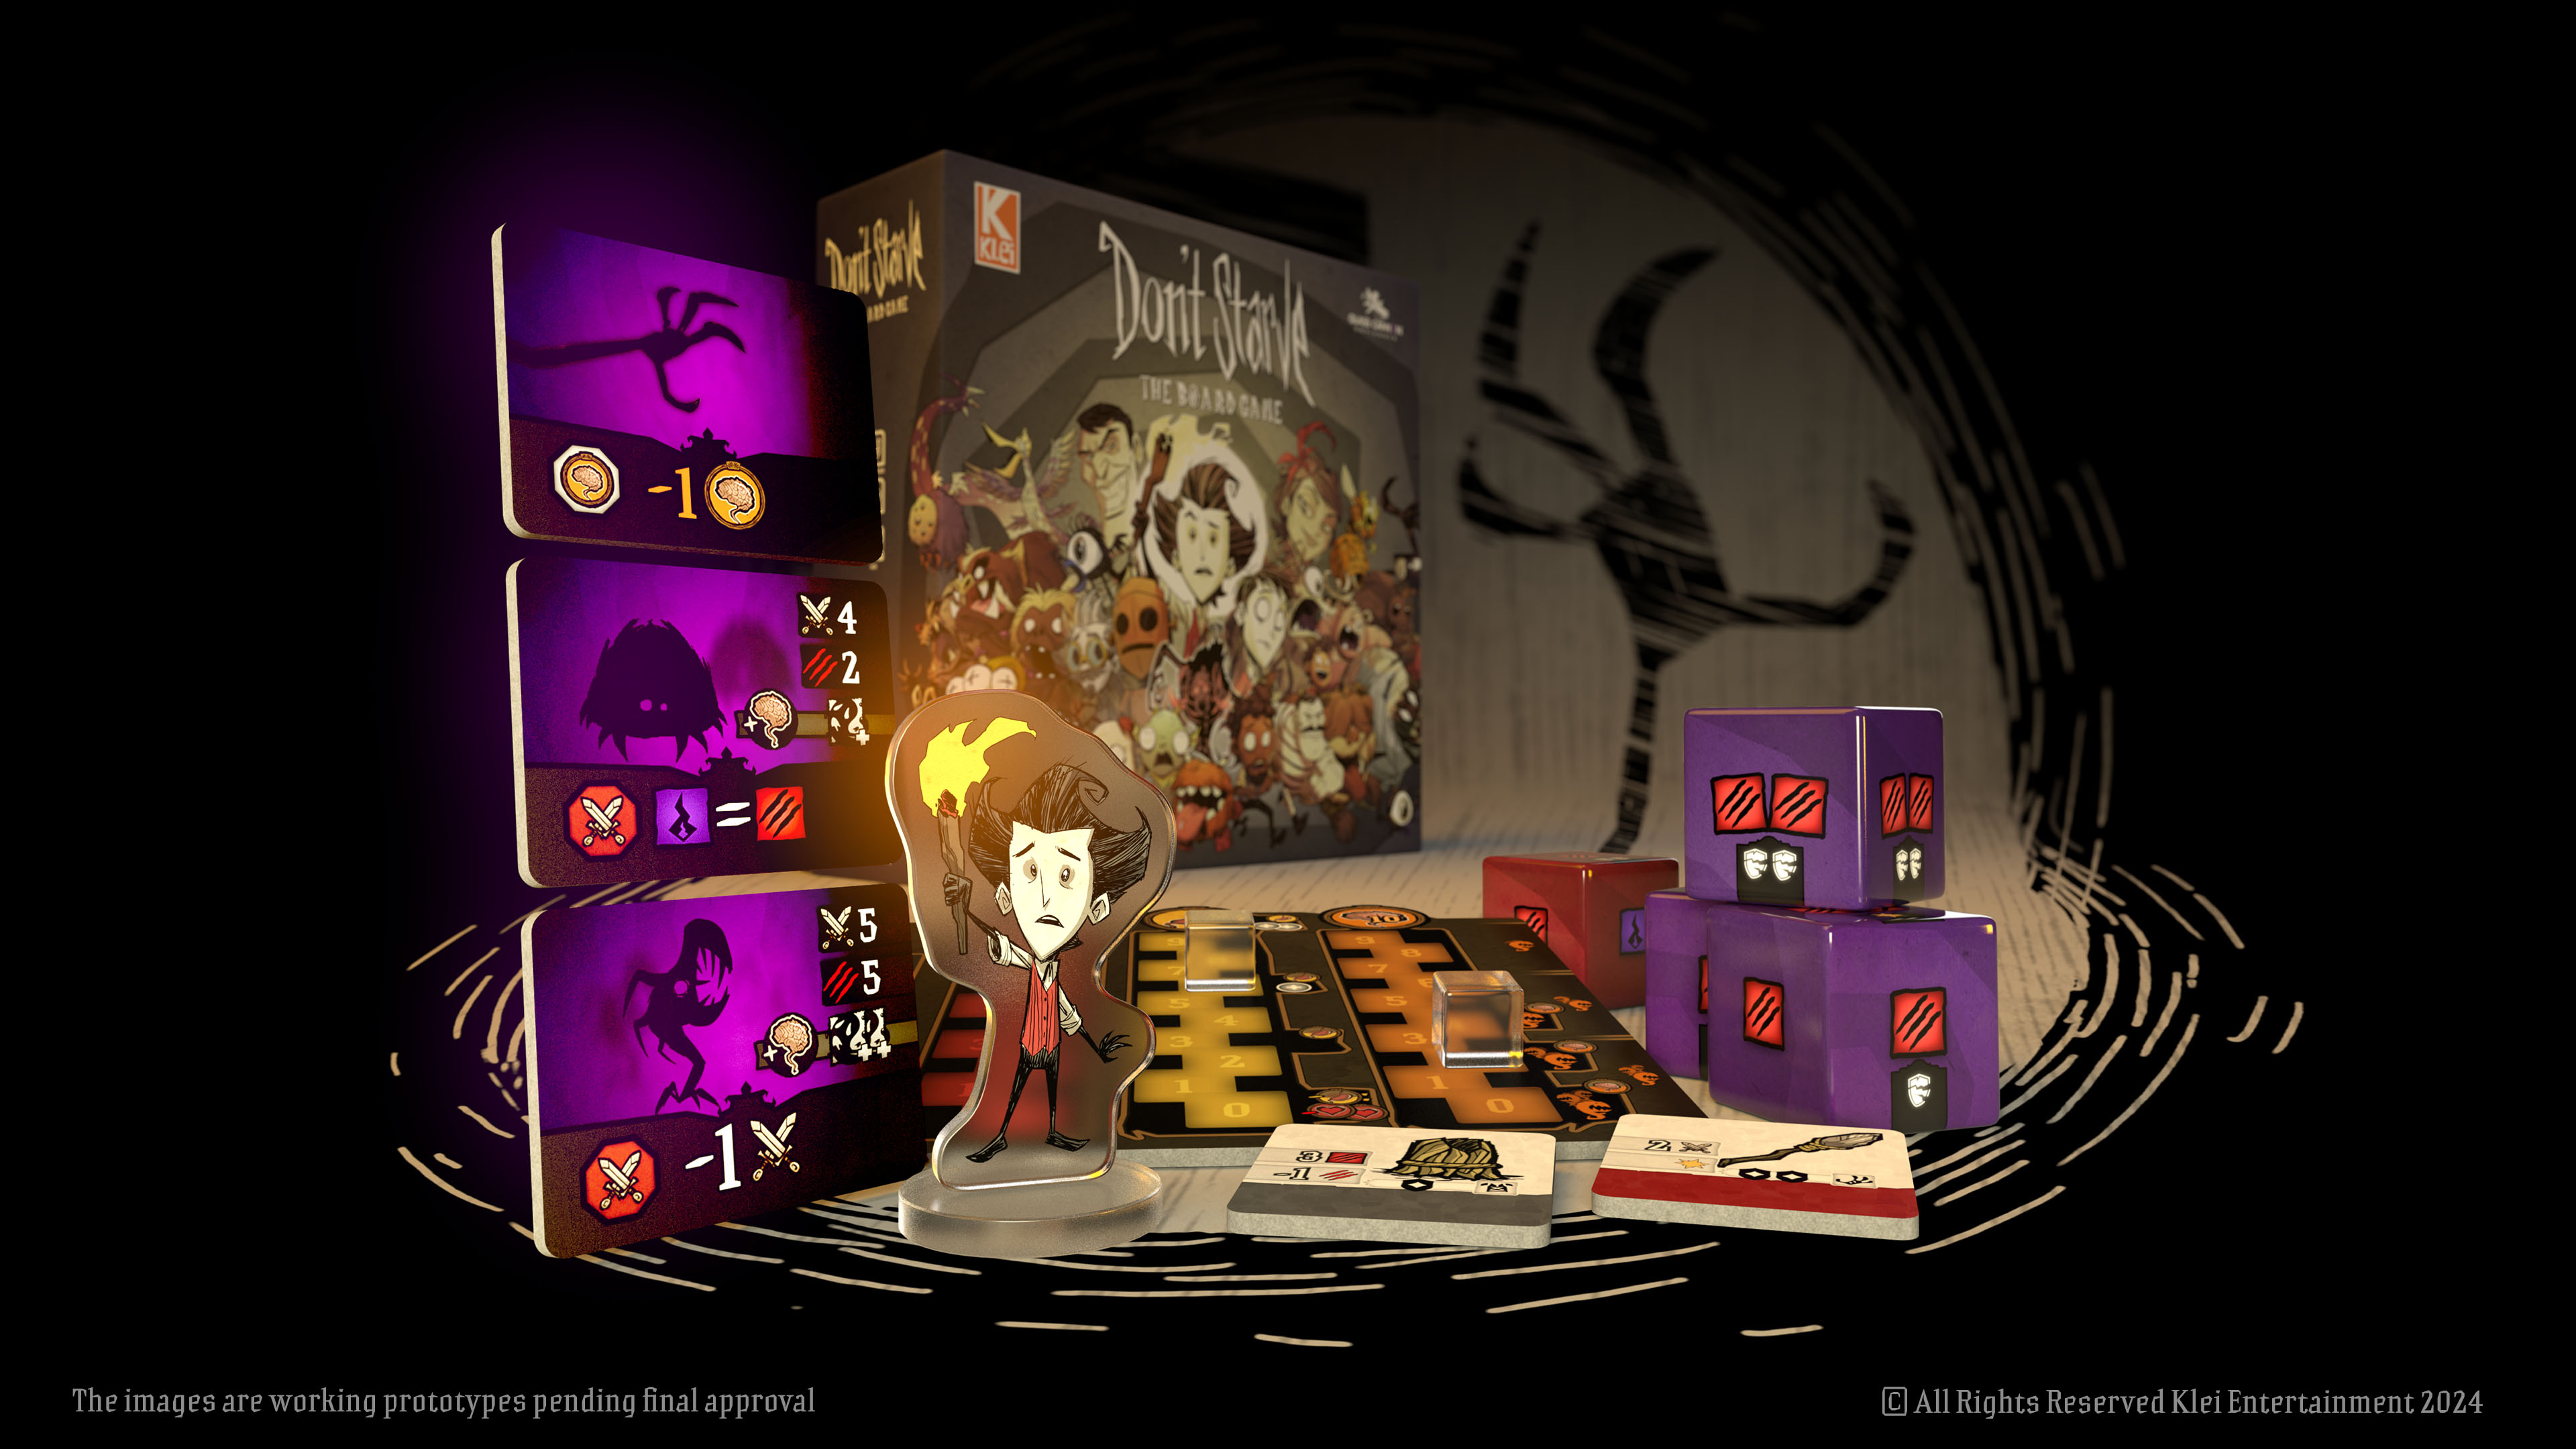 Wilson, the main character from Don’t Starve, rendered as a 2D acrylic standee for a render of the early prototype of Don’t Starve: The Board Game.